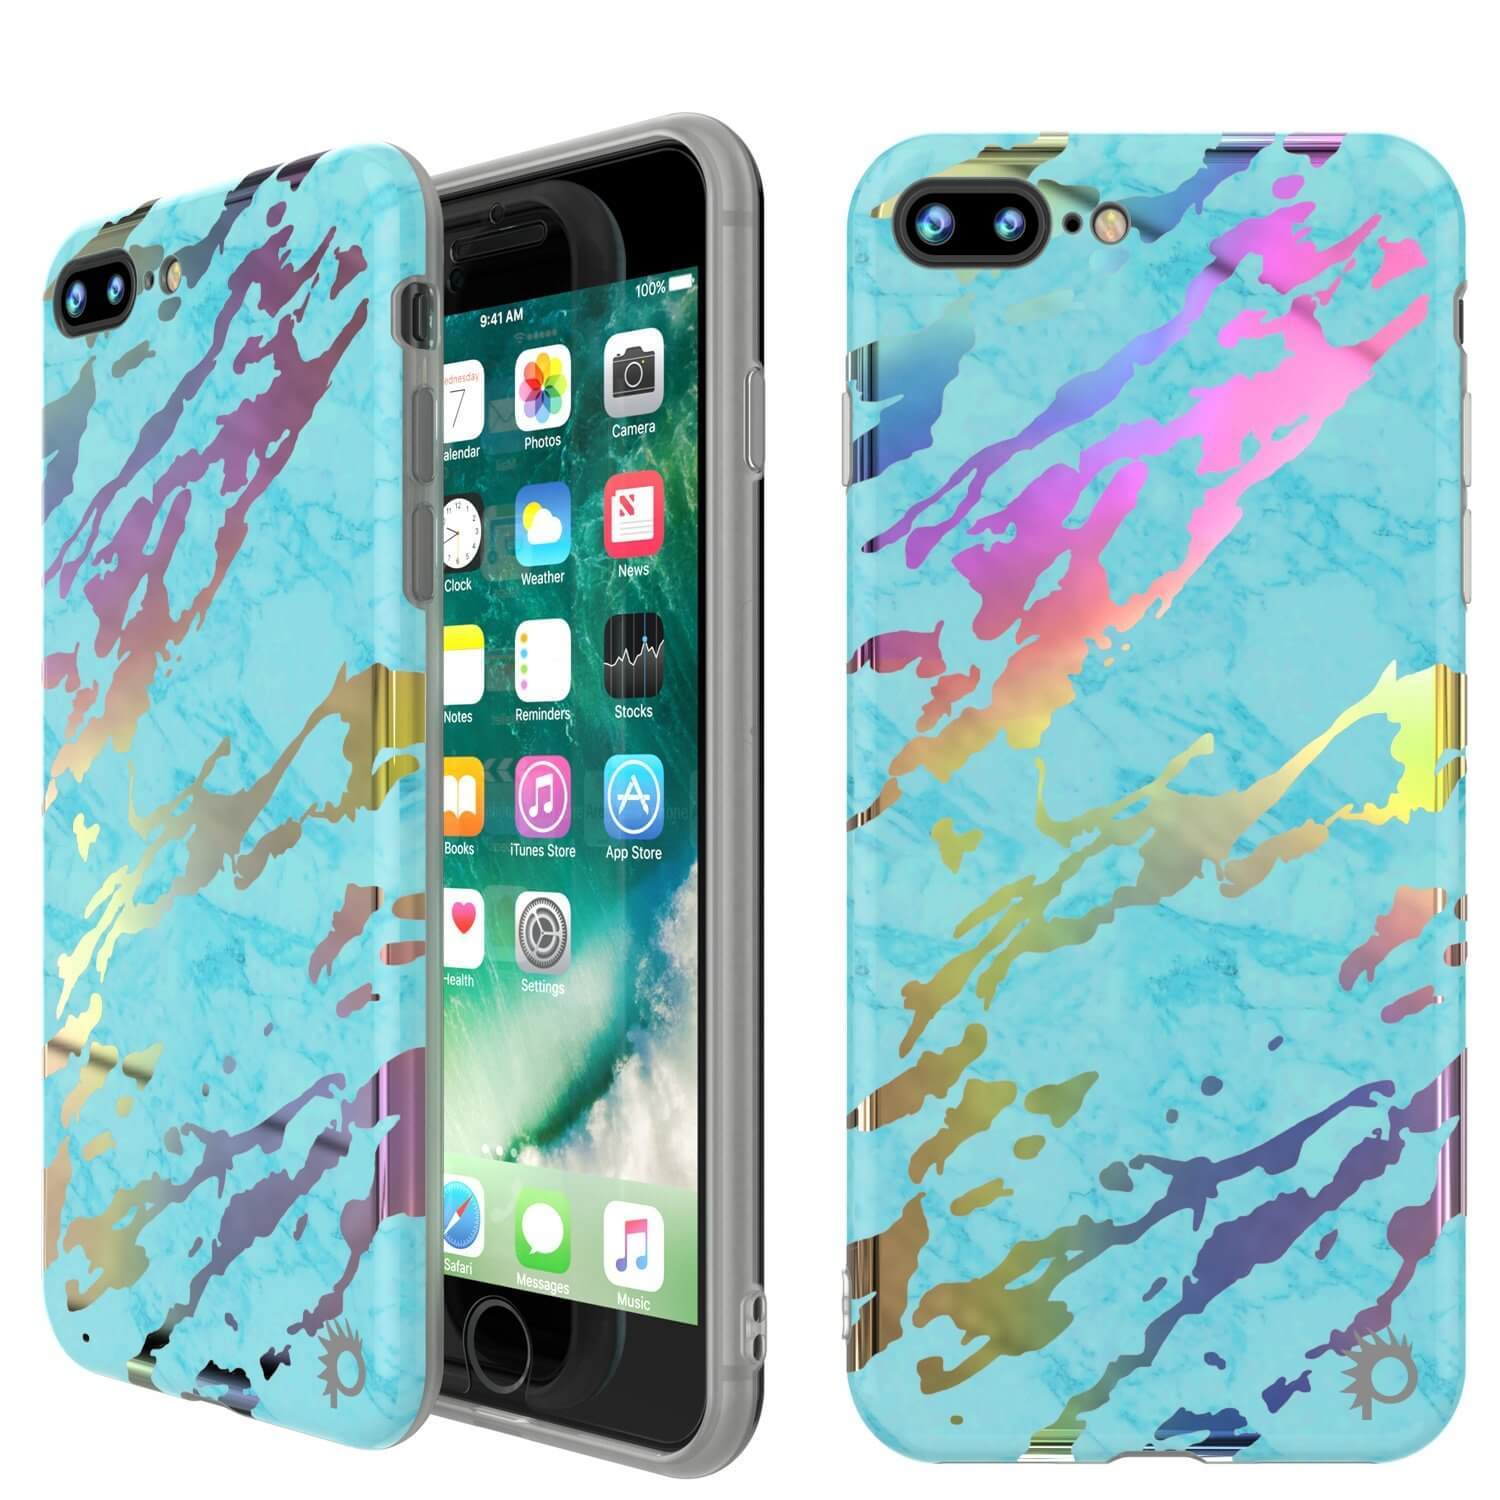 Punkcase iPhone 8+ / 7+ Plus Marble Case, Protective Full Body Cover W/9H Tempered Glass Screen Protector (Teal Onyx)